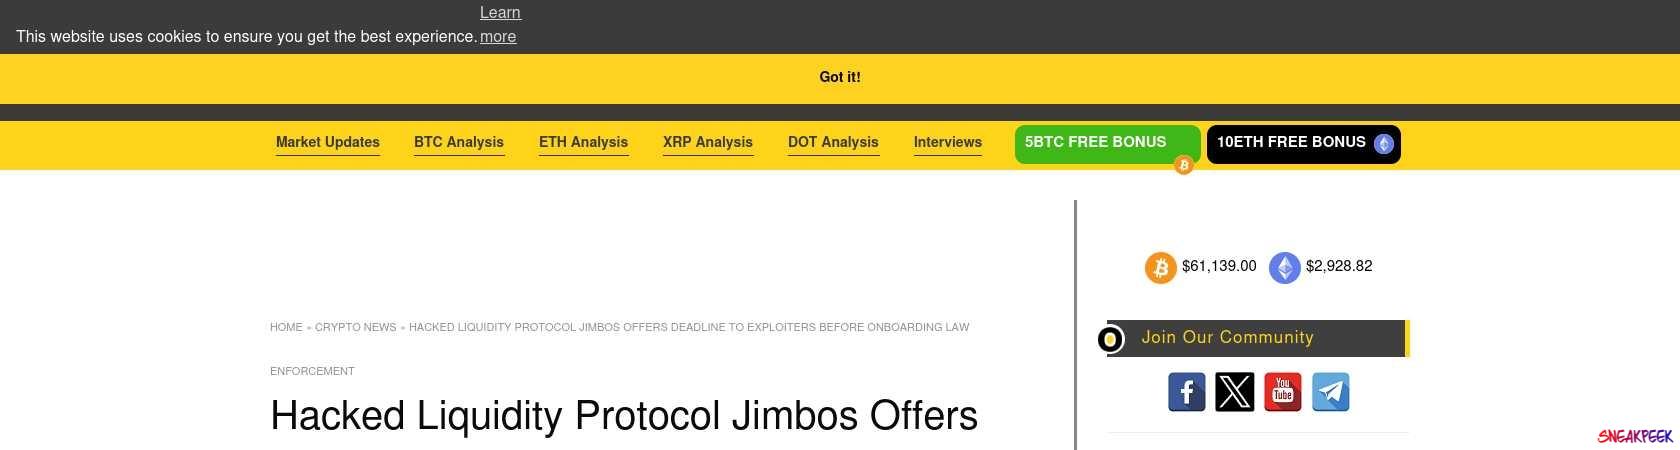 Read the full Article:  ⭲ Hacked Liquidity Protocol Jimbos Offers Deadline to Exploiters Before Onboarding Law Enforcement